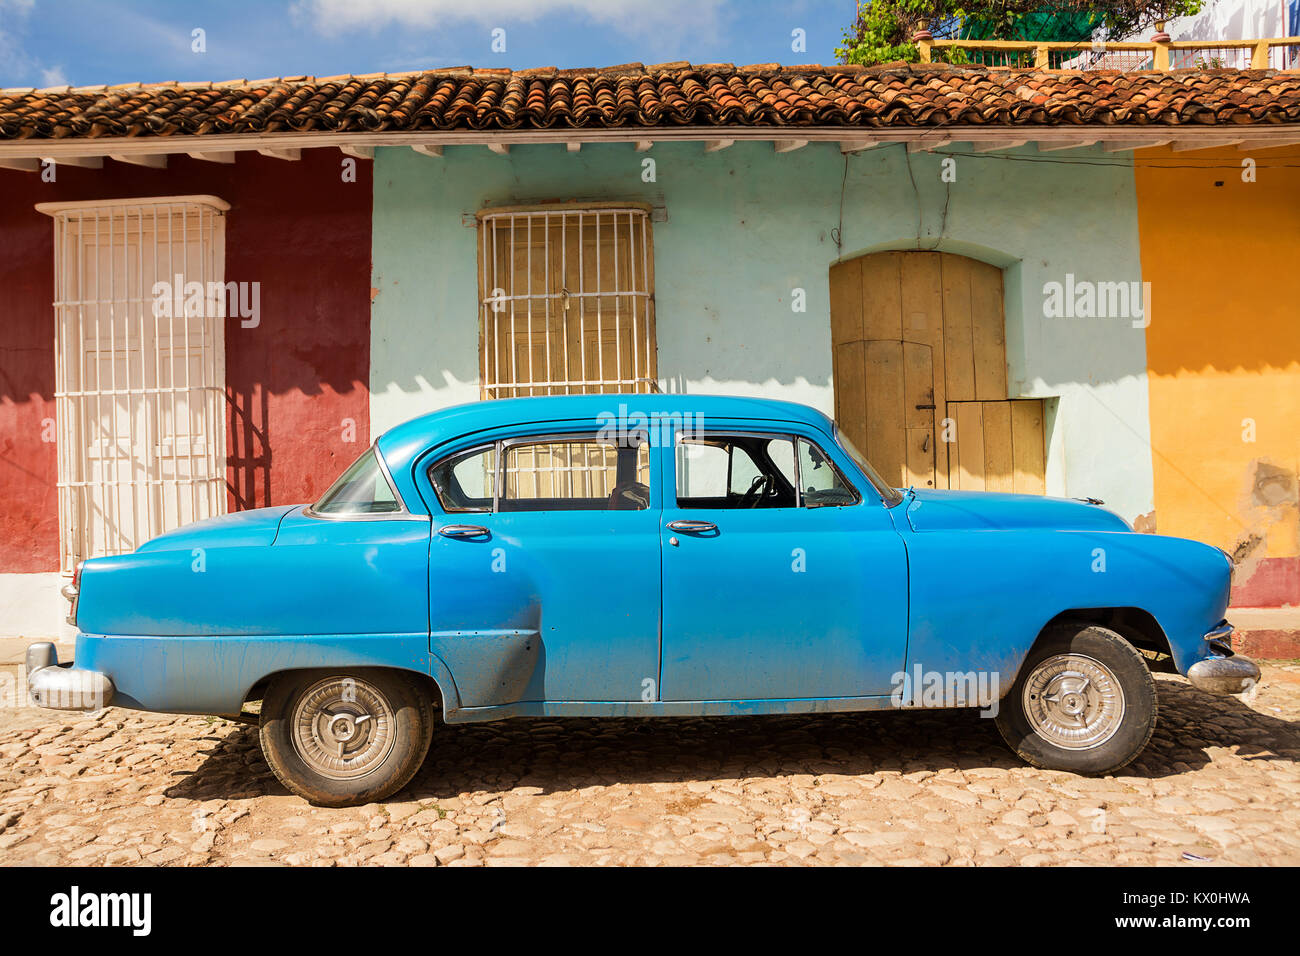 Old classic fifties car in a street of Trinidad Stock Photo